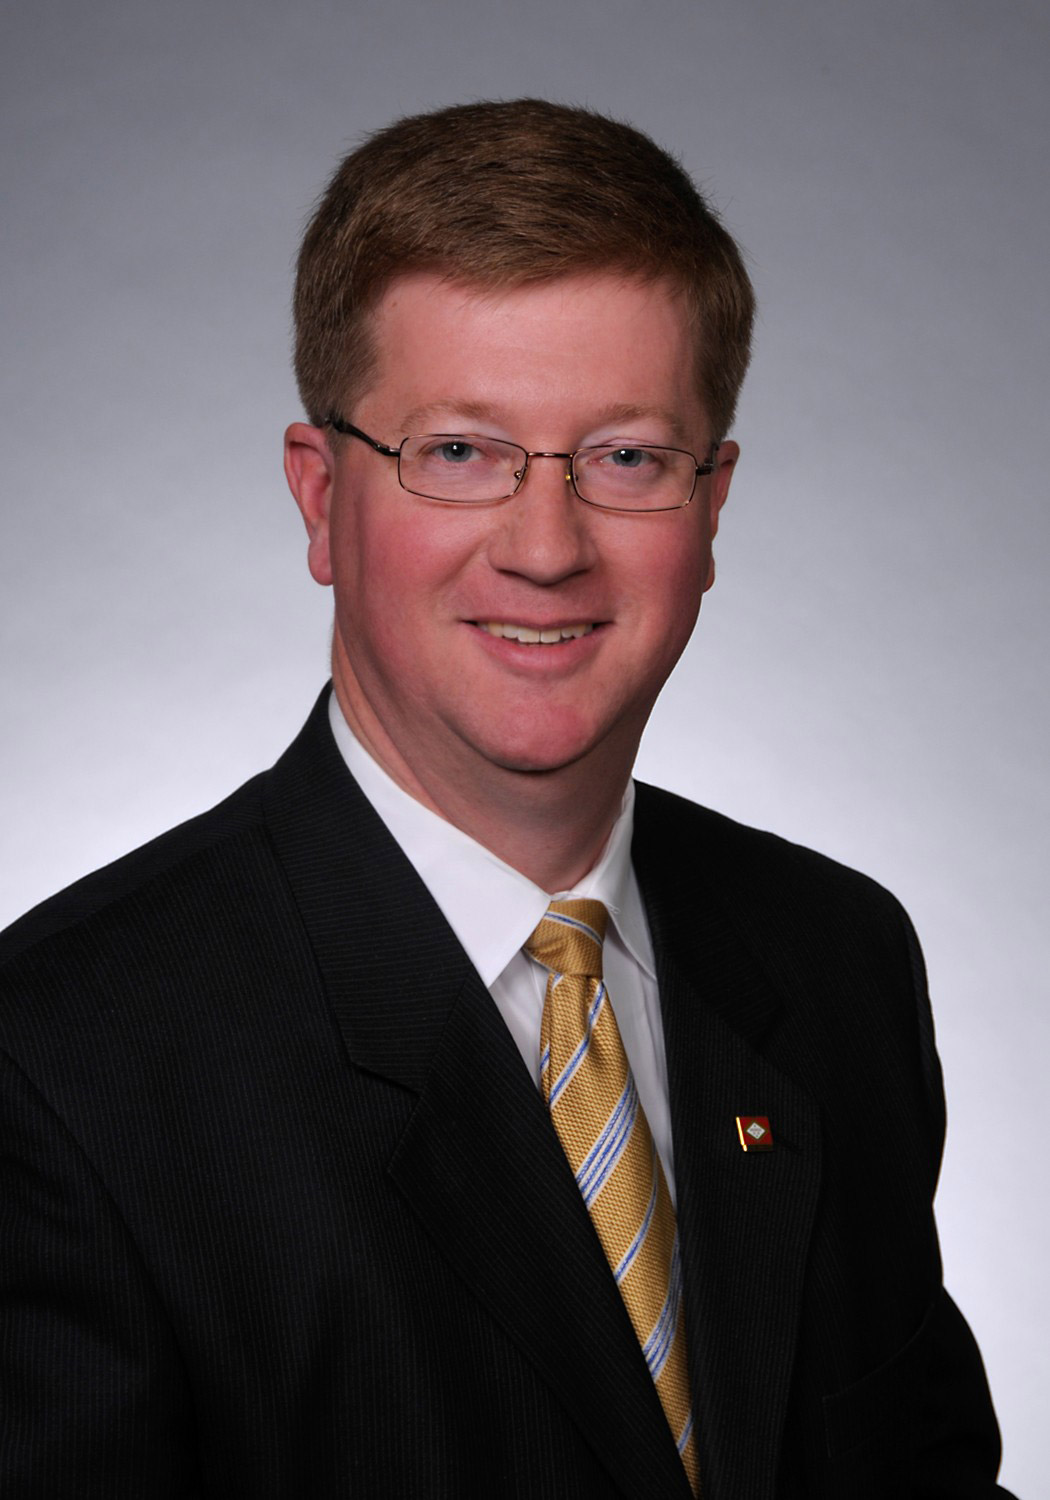 White man with glasses wearing suit and tie